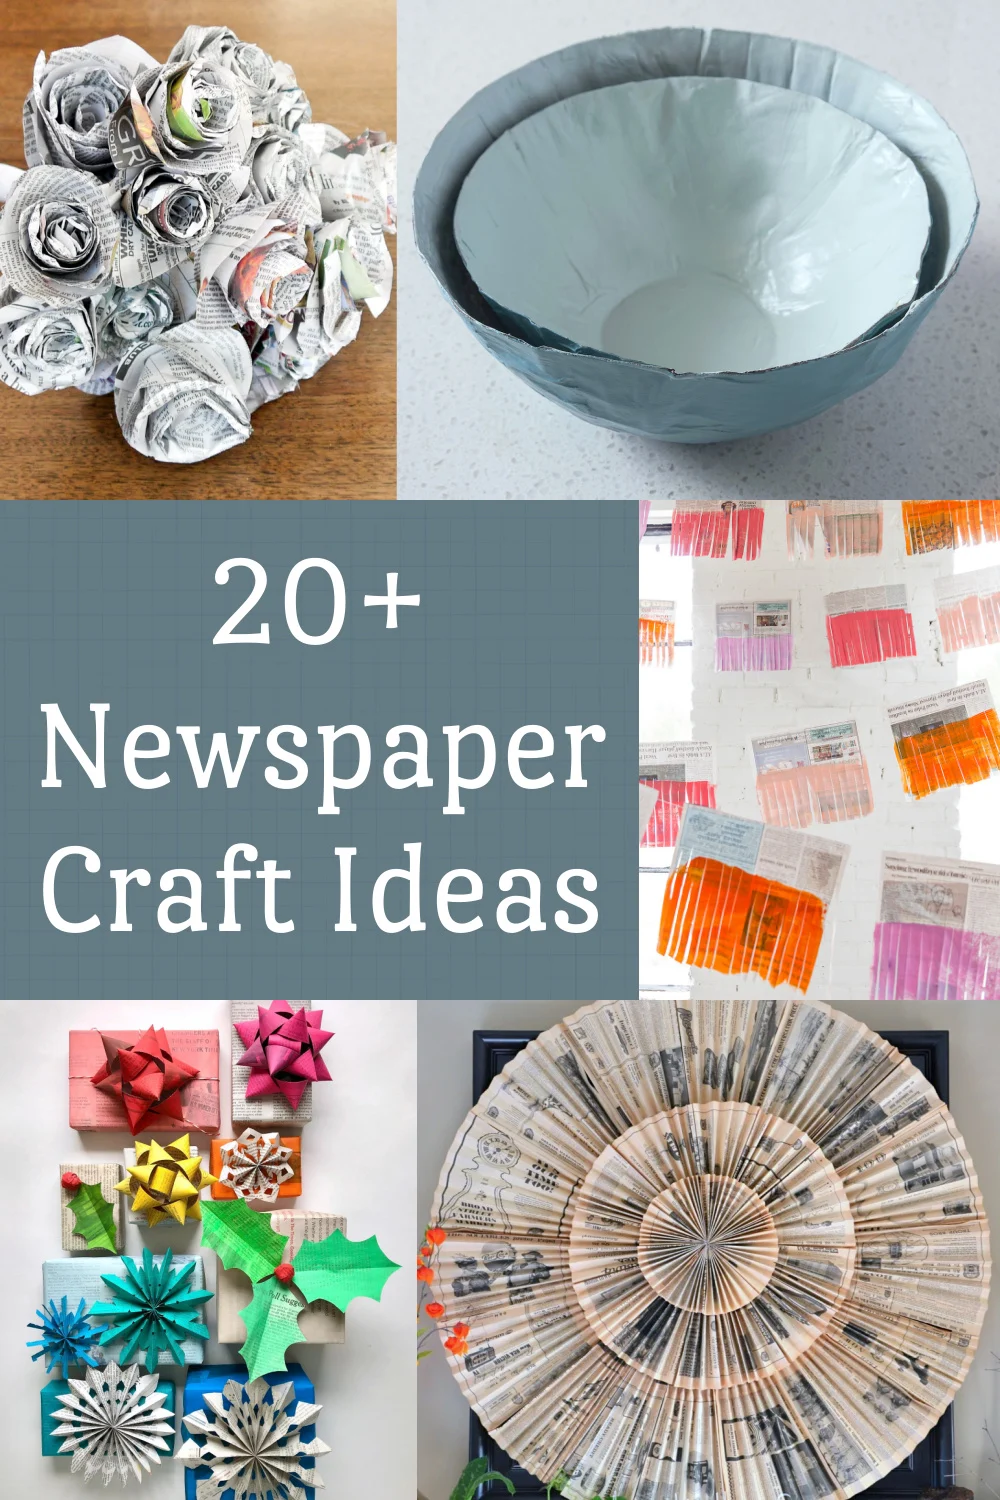 20 DIY Stuff to Make From Recycled Plastic Bags